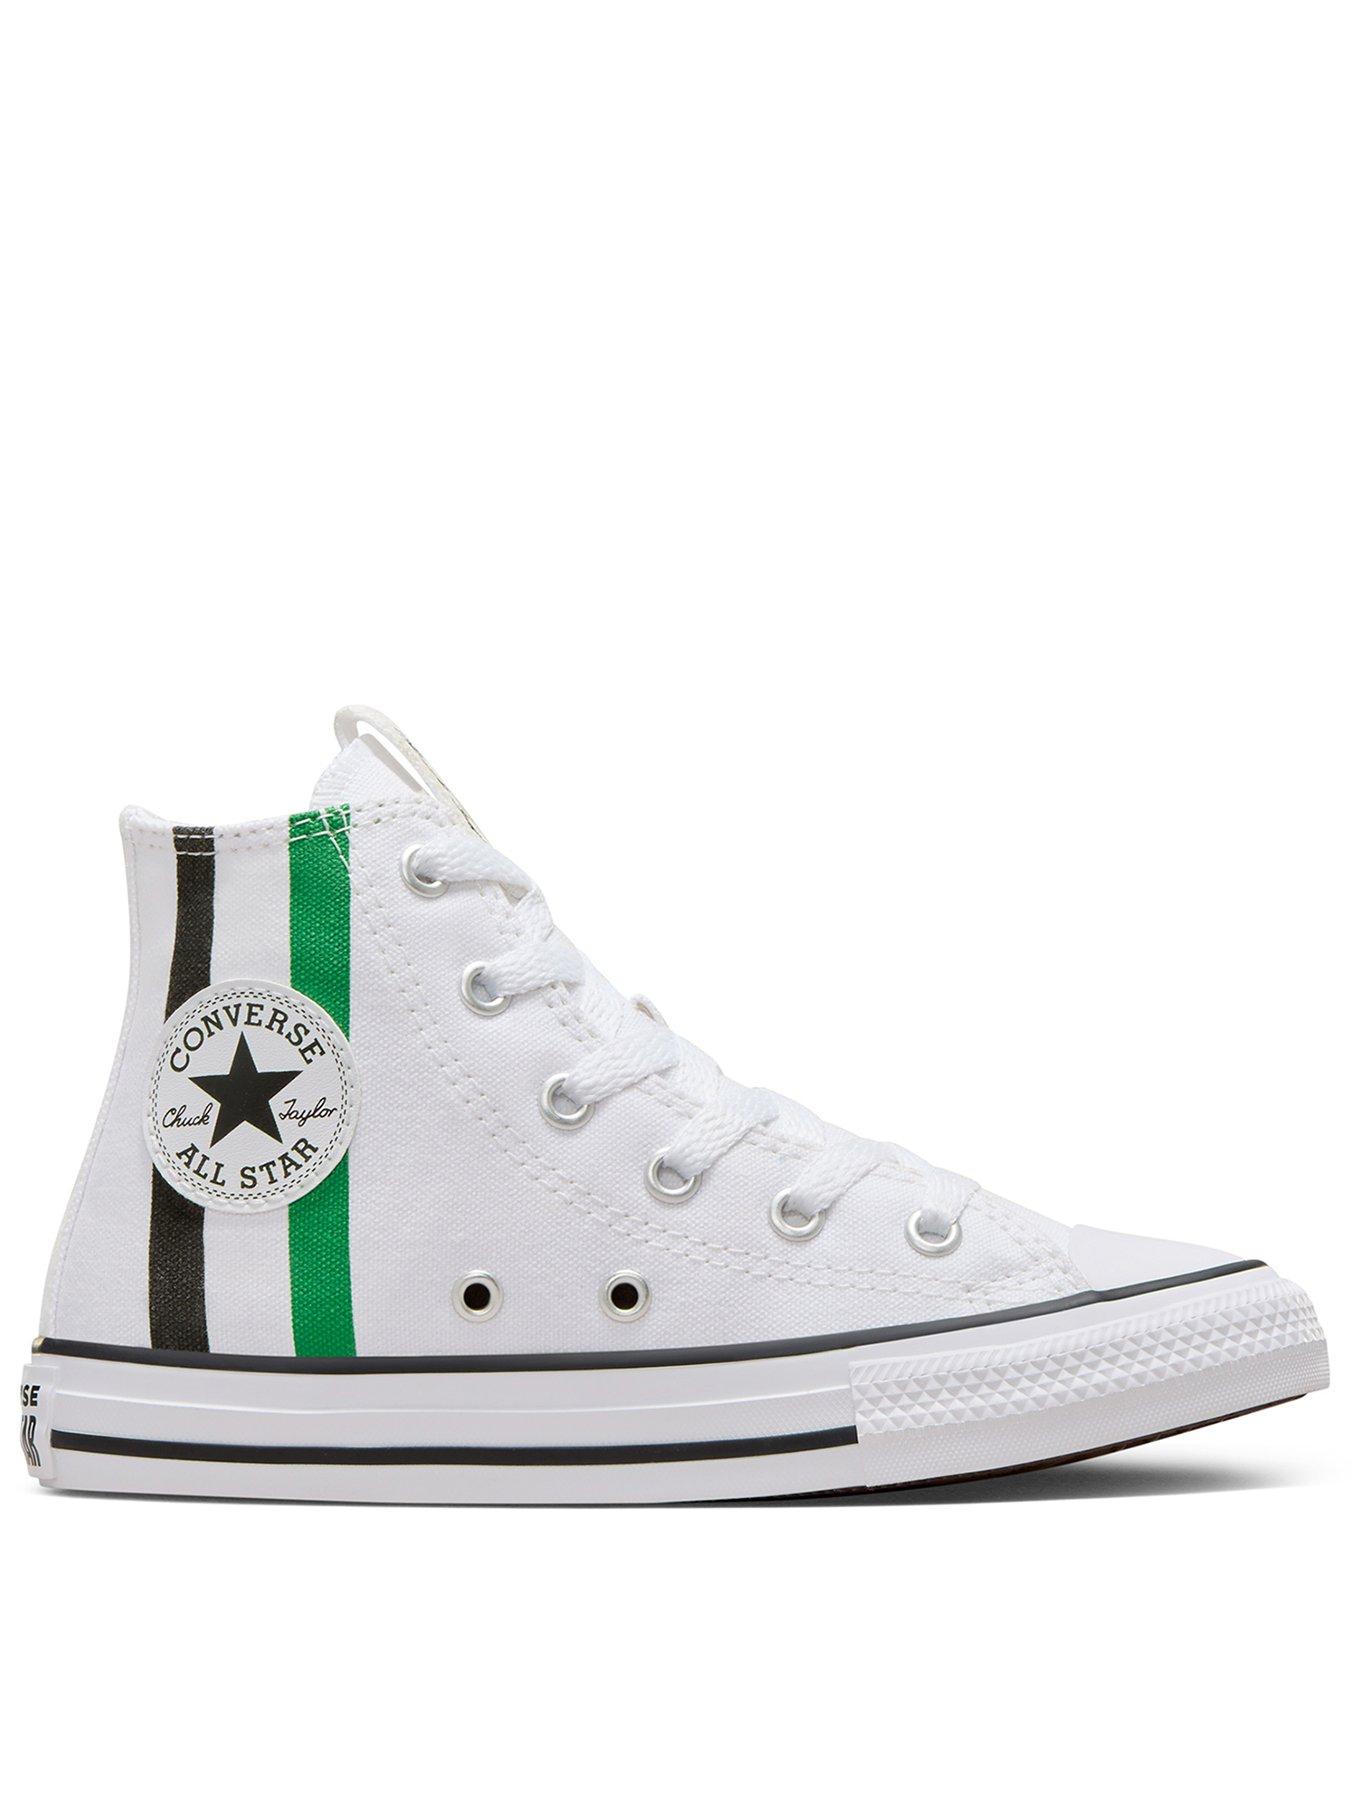 Converse Kids Girls Home Team High Tops Trainers - White/Green, White/Green, Size 2 Older